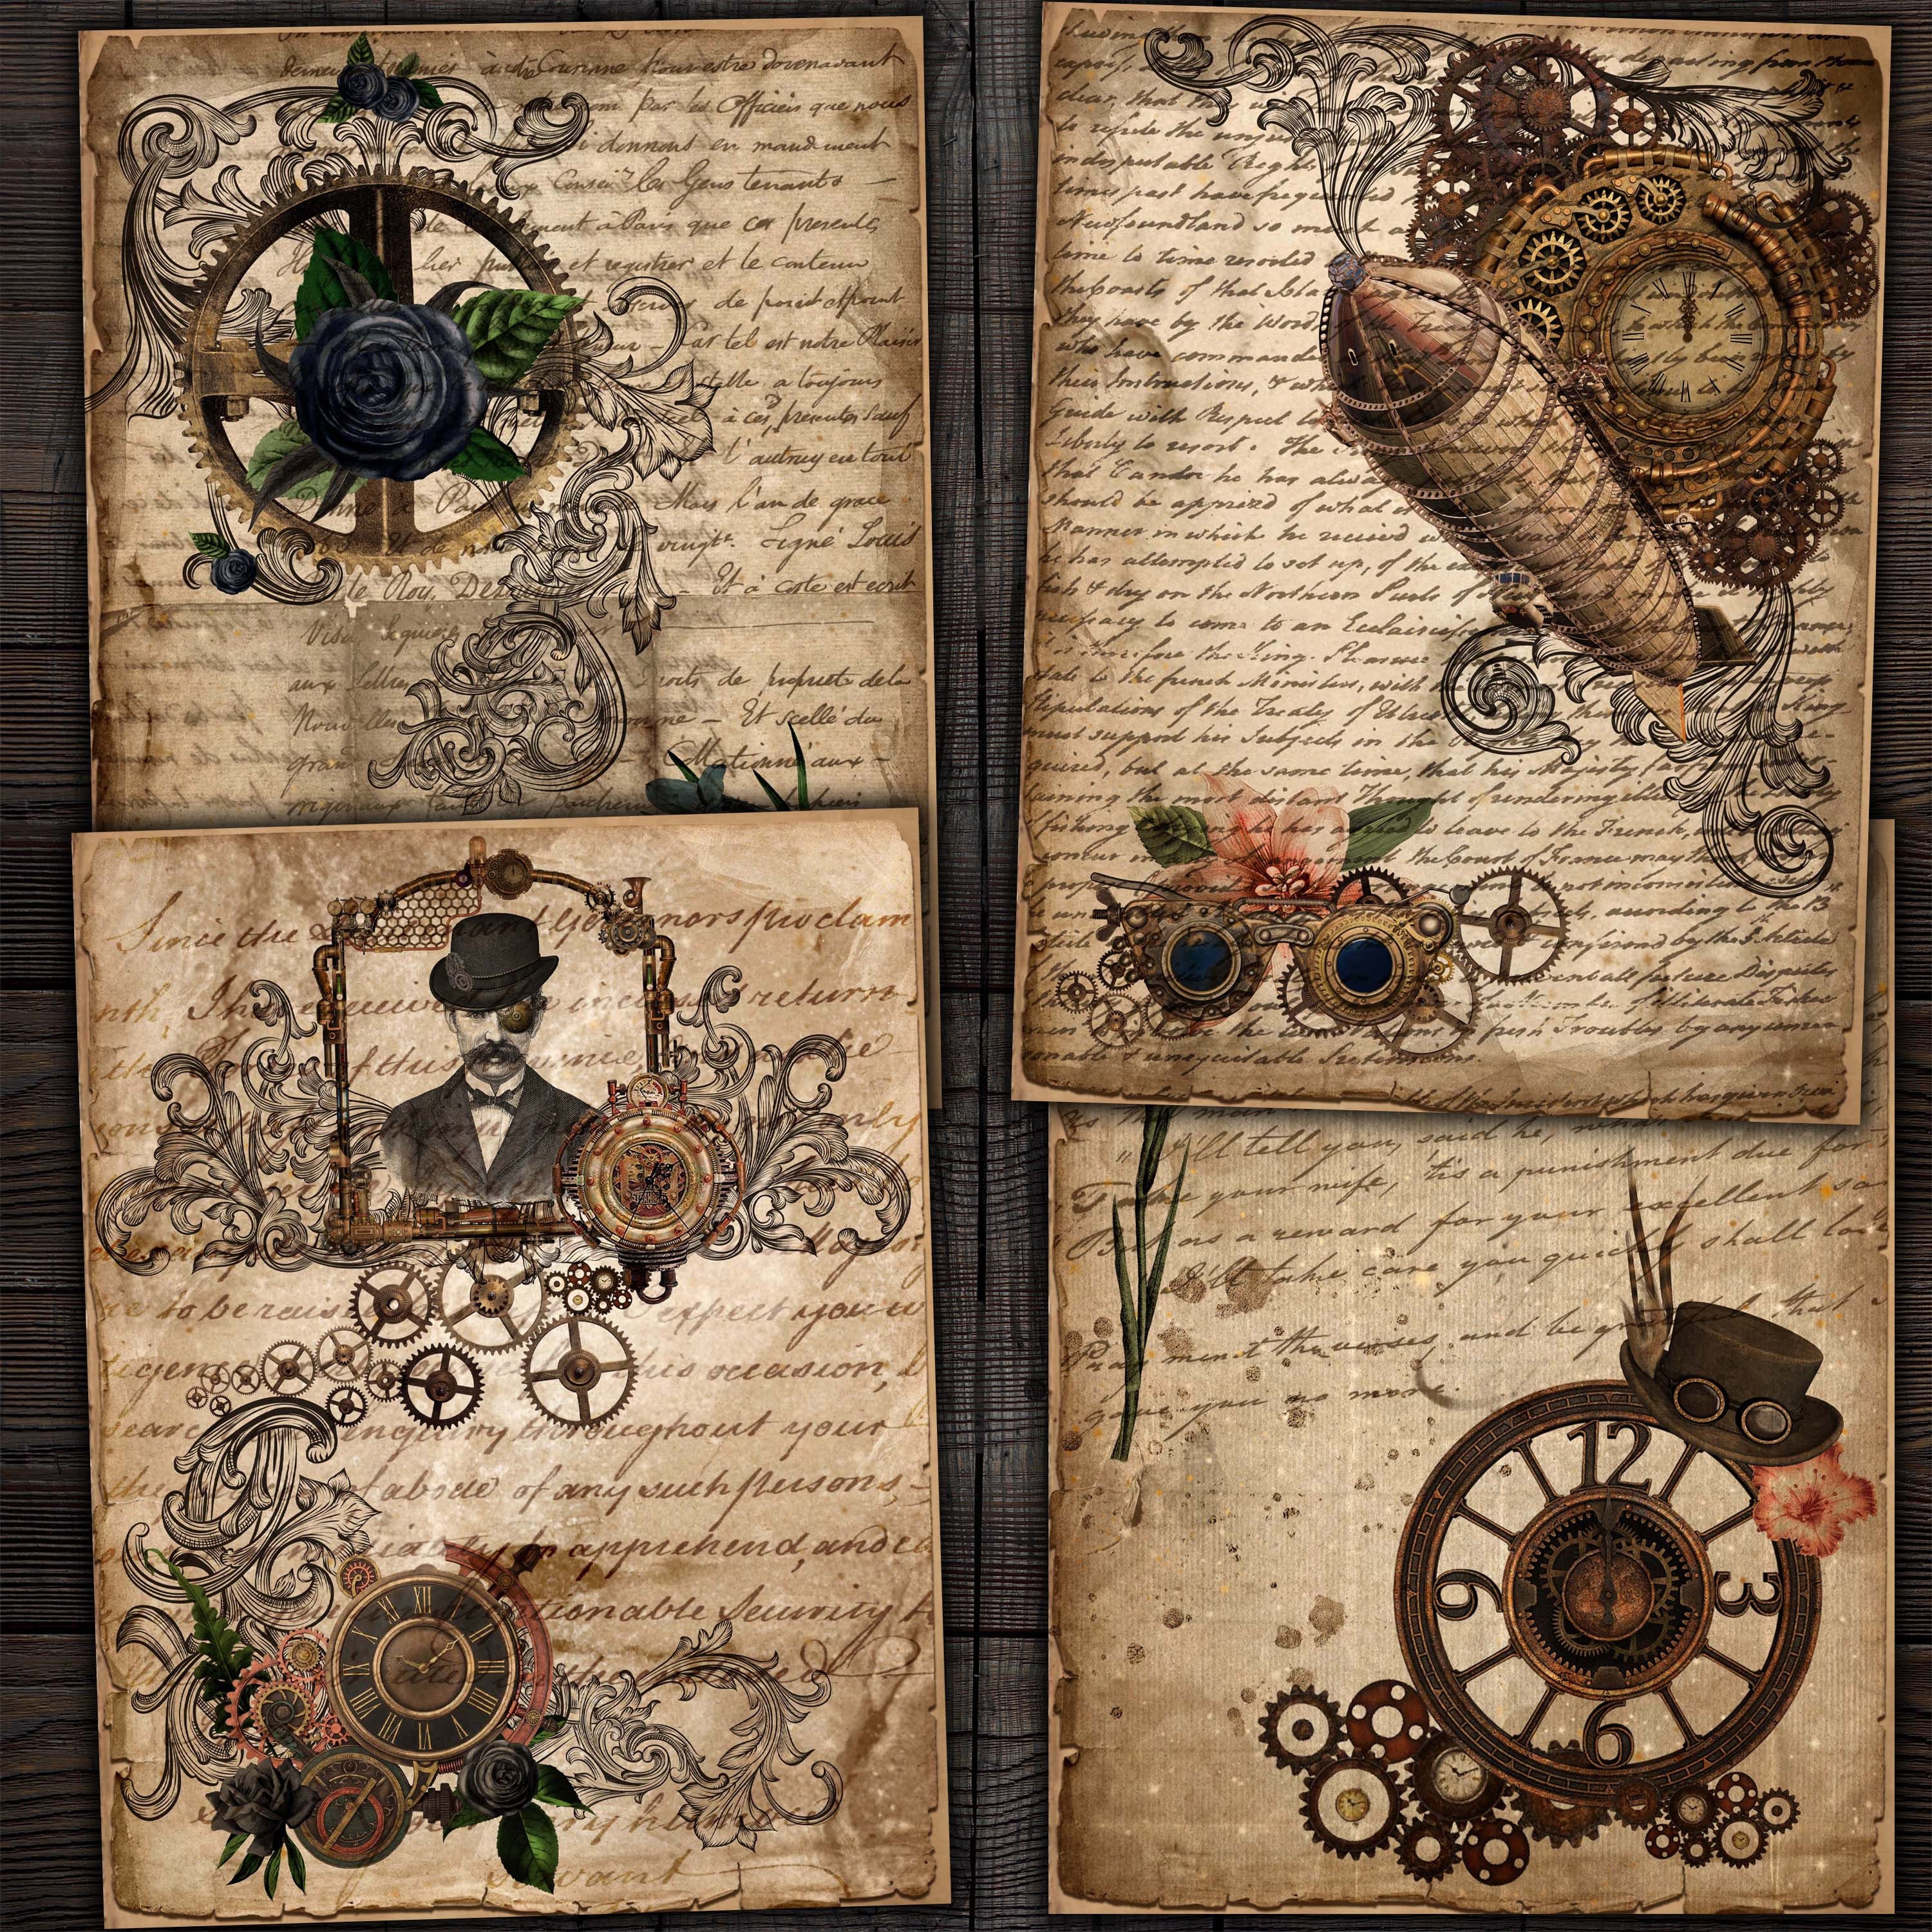 Steampunk and Grunge Junk Journal Ephemera, Papers, Pockets, Tags and  More!: A Paper Junk Journal Kit With Everything You Need to Make a DIY  Steampunk